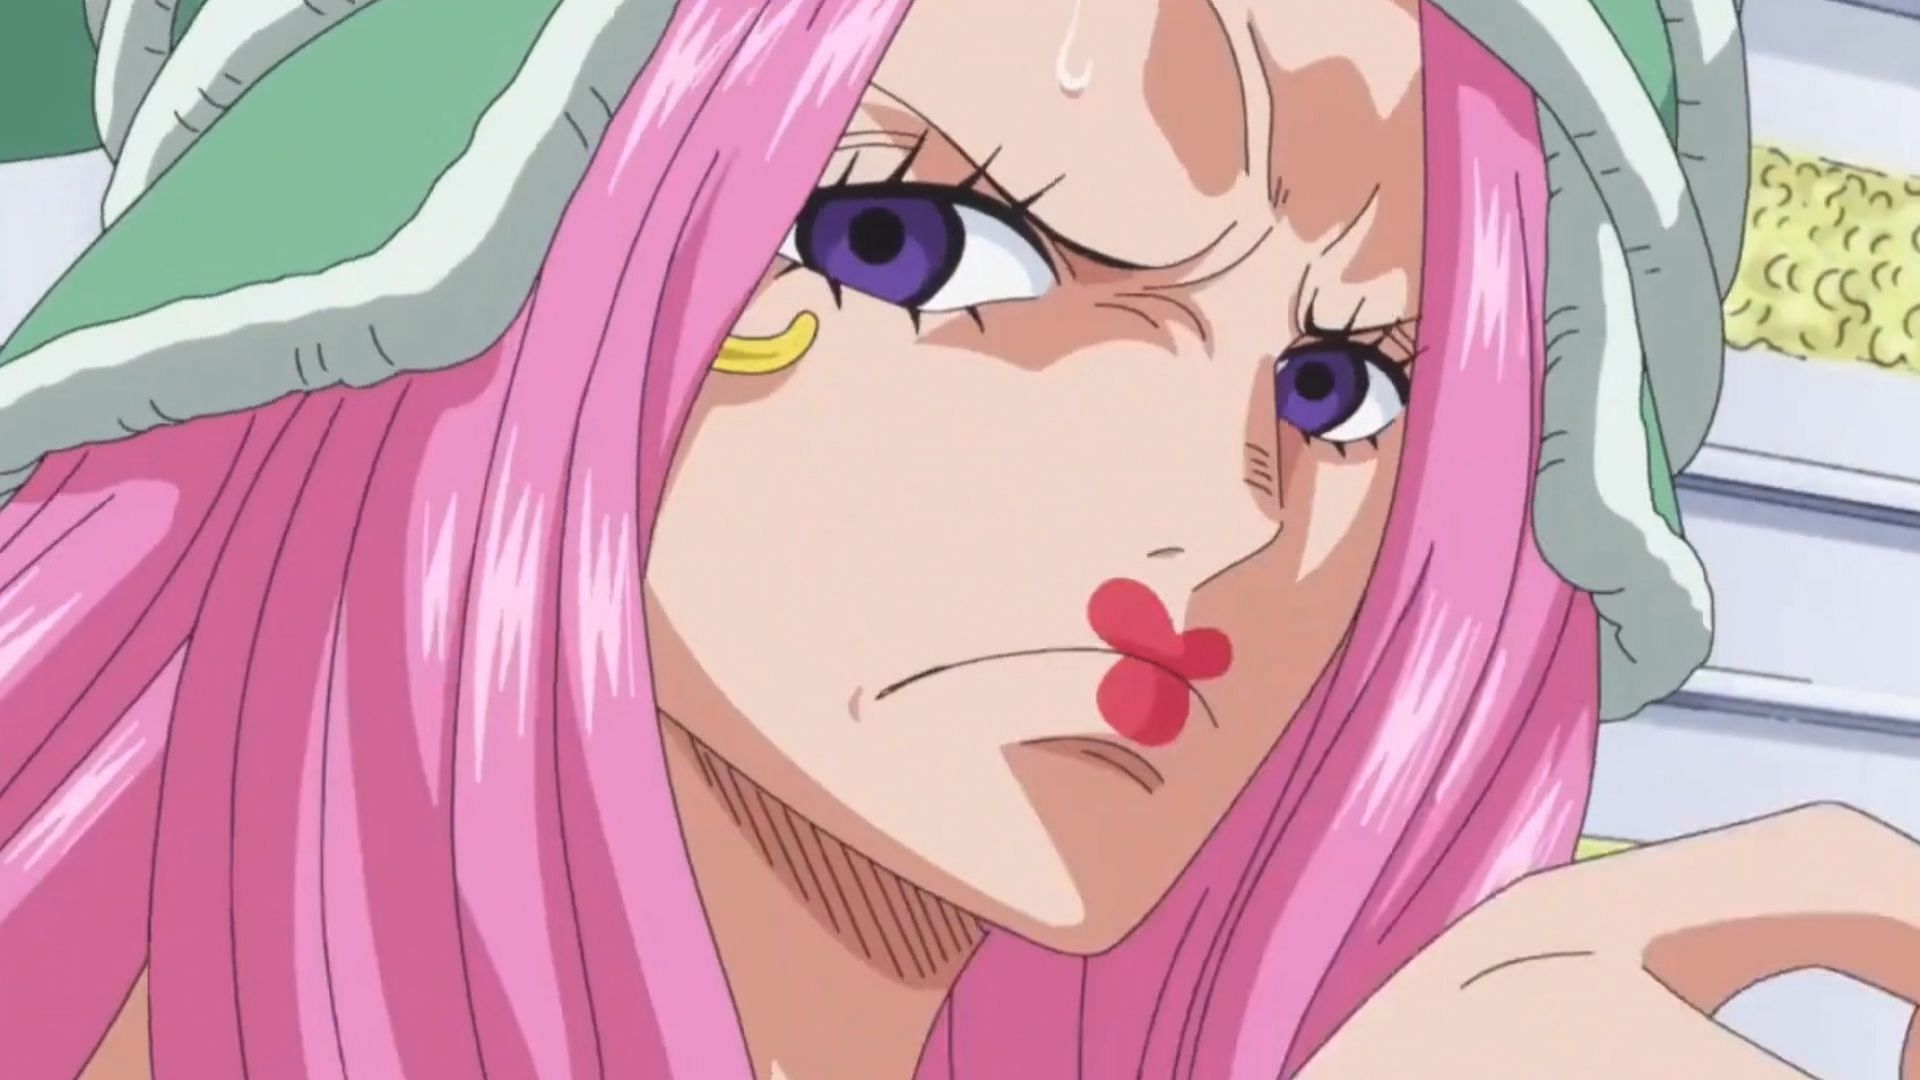 Jewelry Bonney as seen in the One Piece anime (Image via Toei Animation)